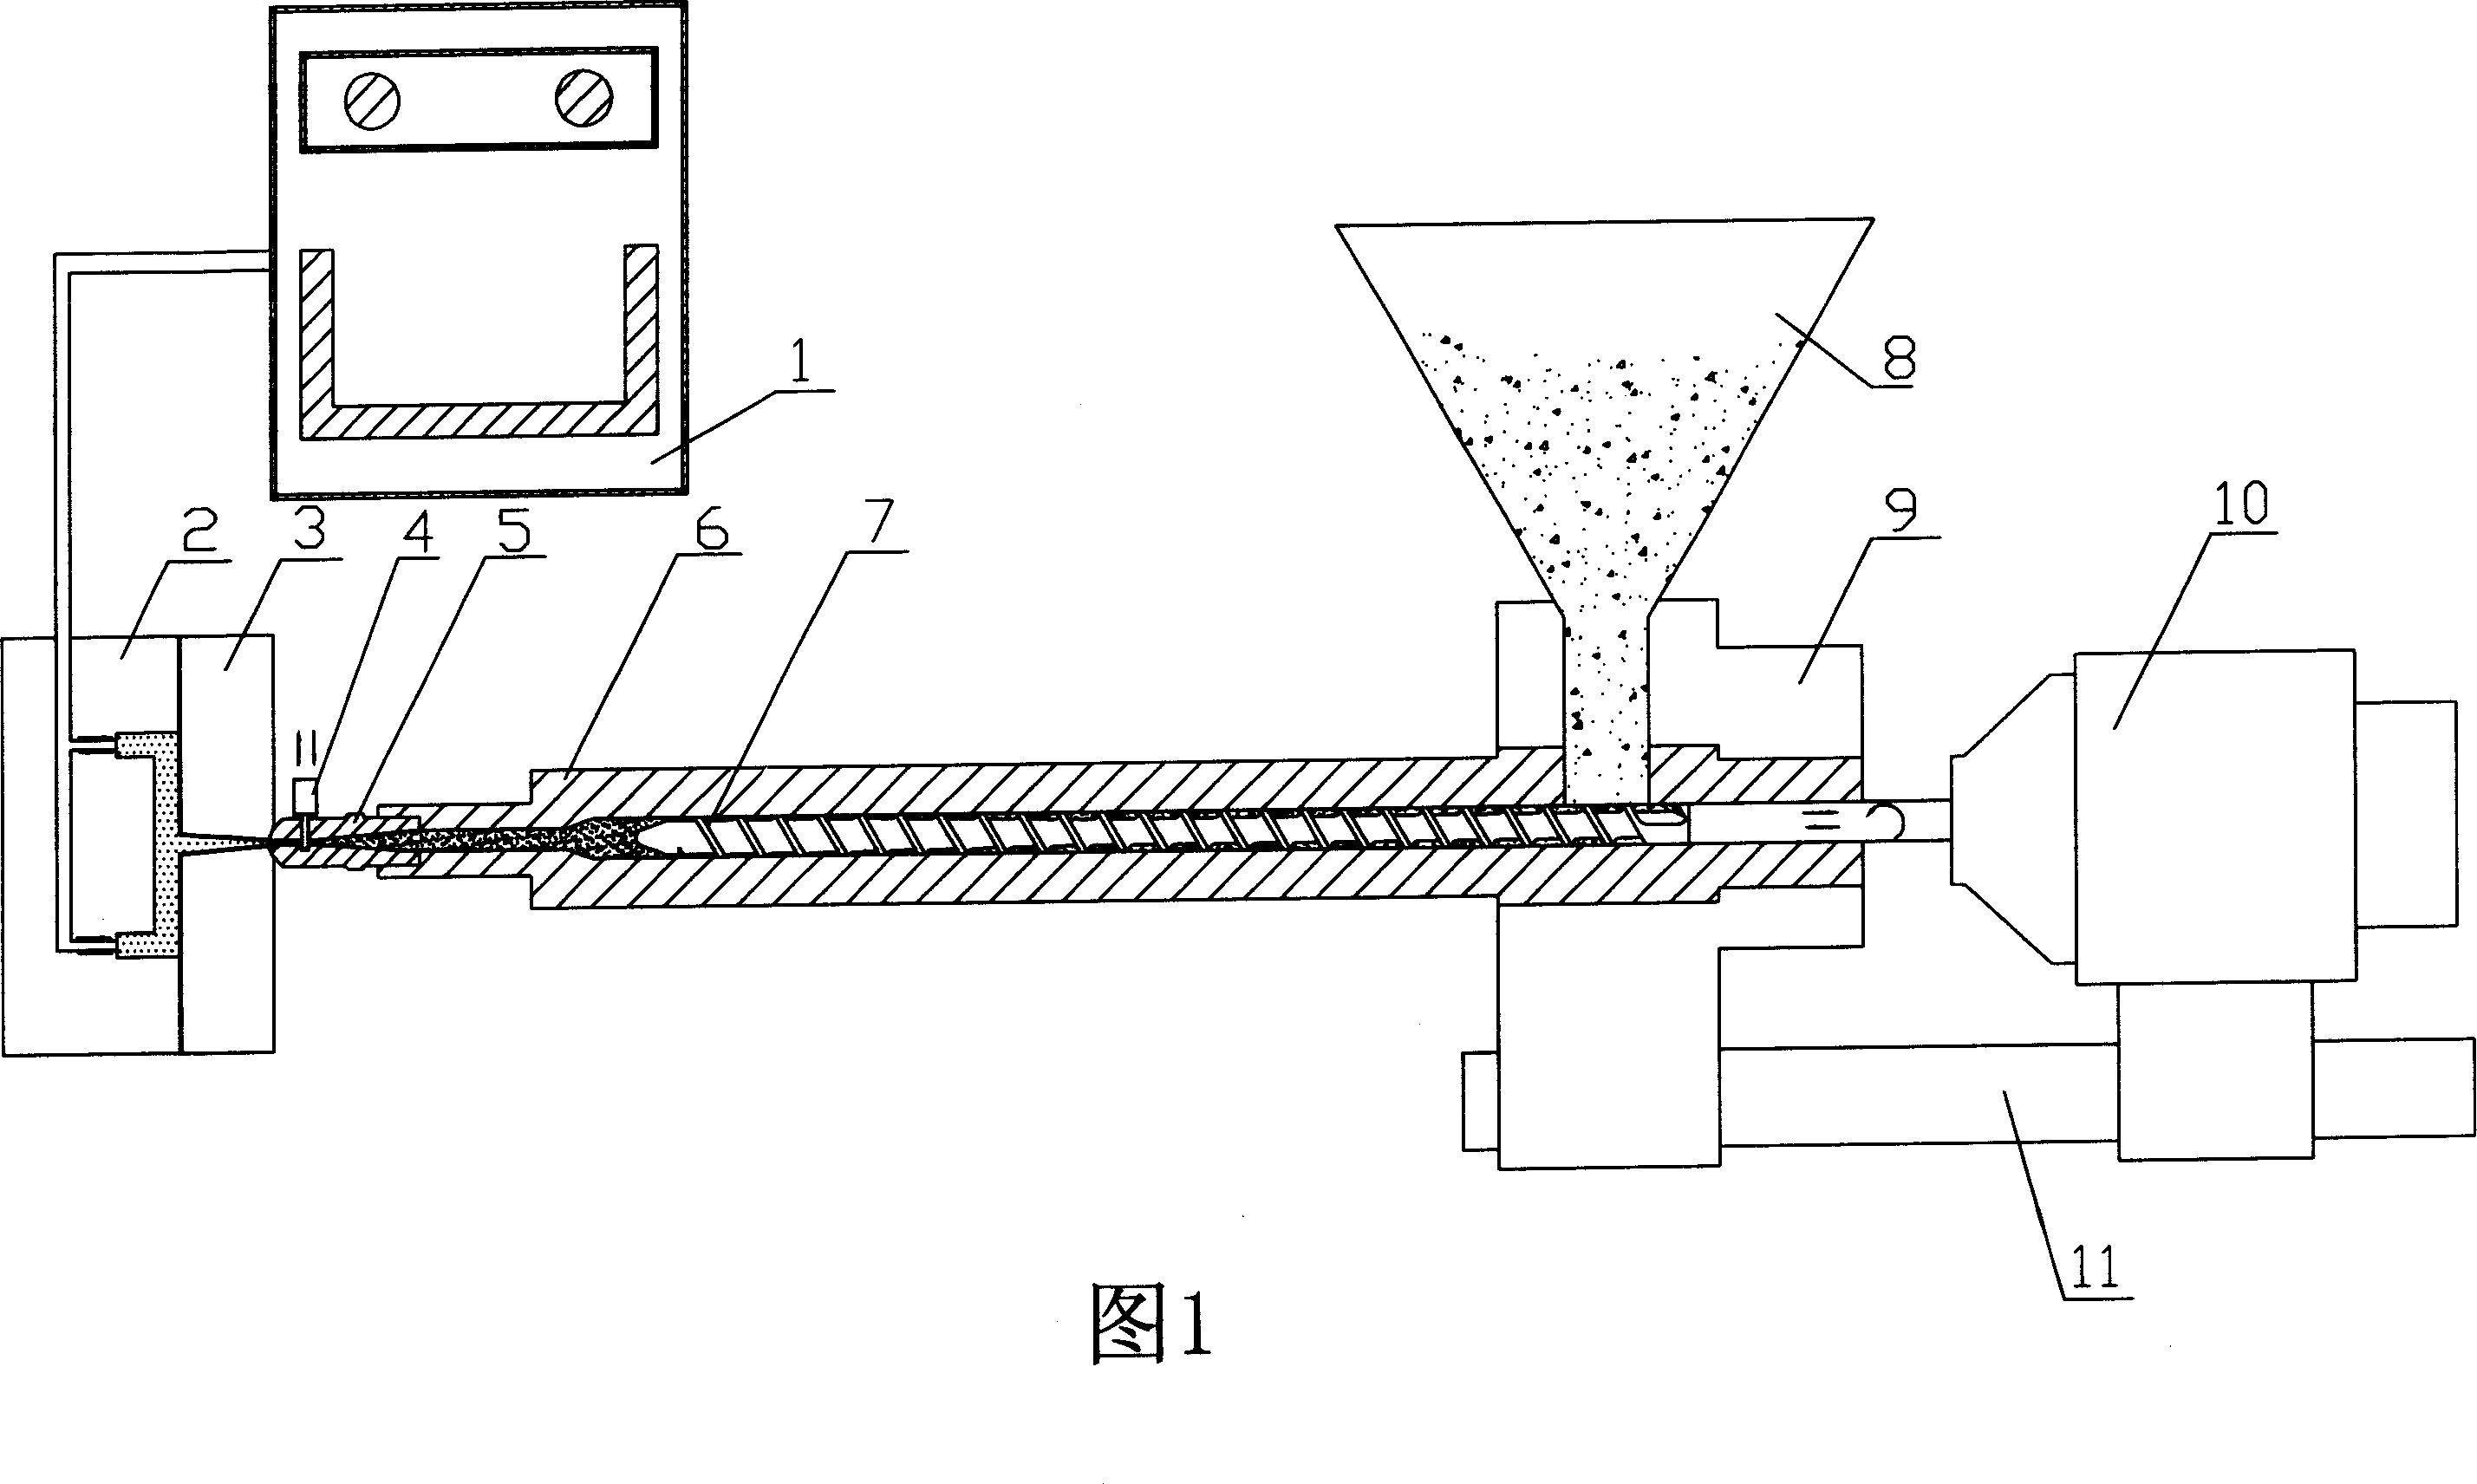 High speed injecting molding method by counter pressure method and chemical foaming method